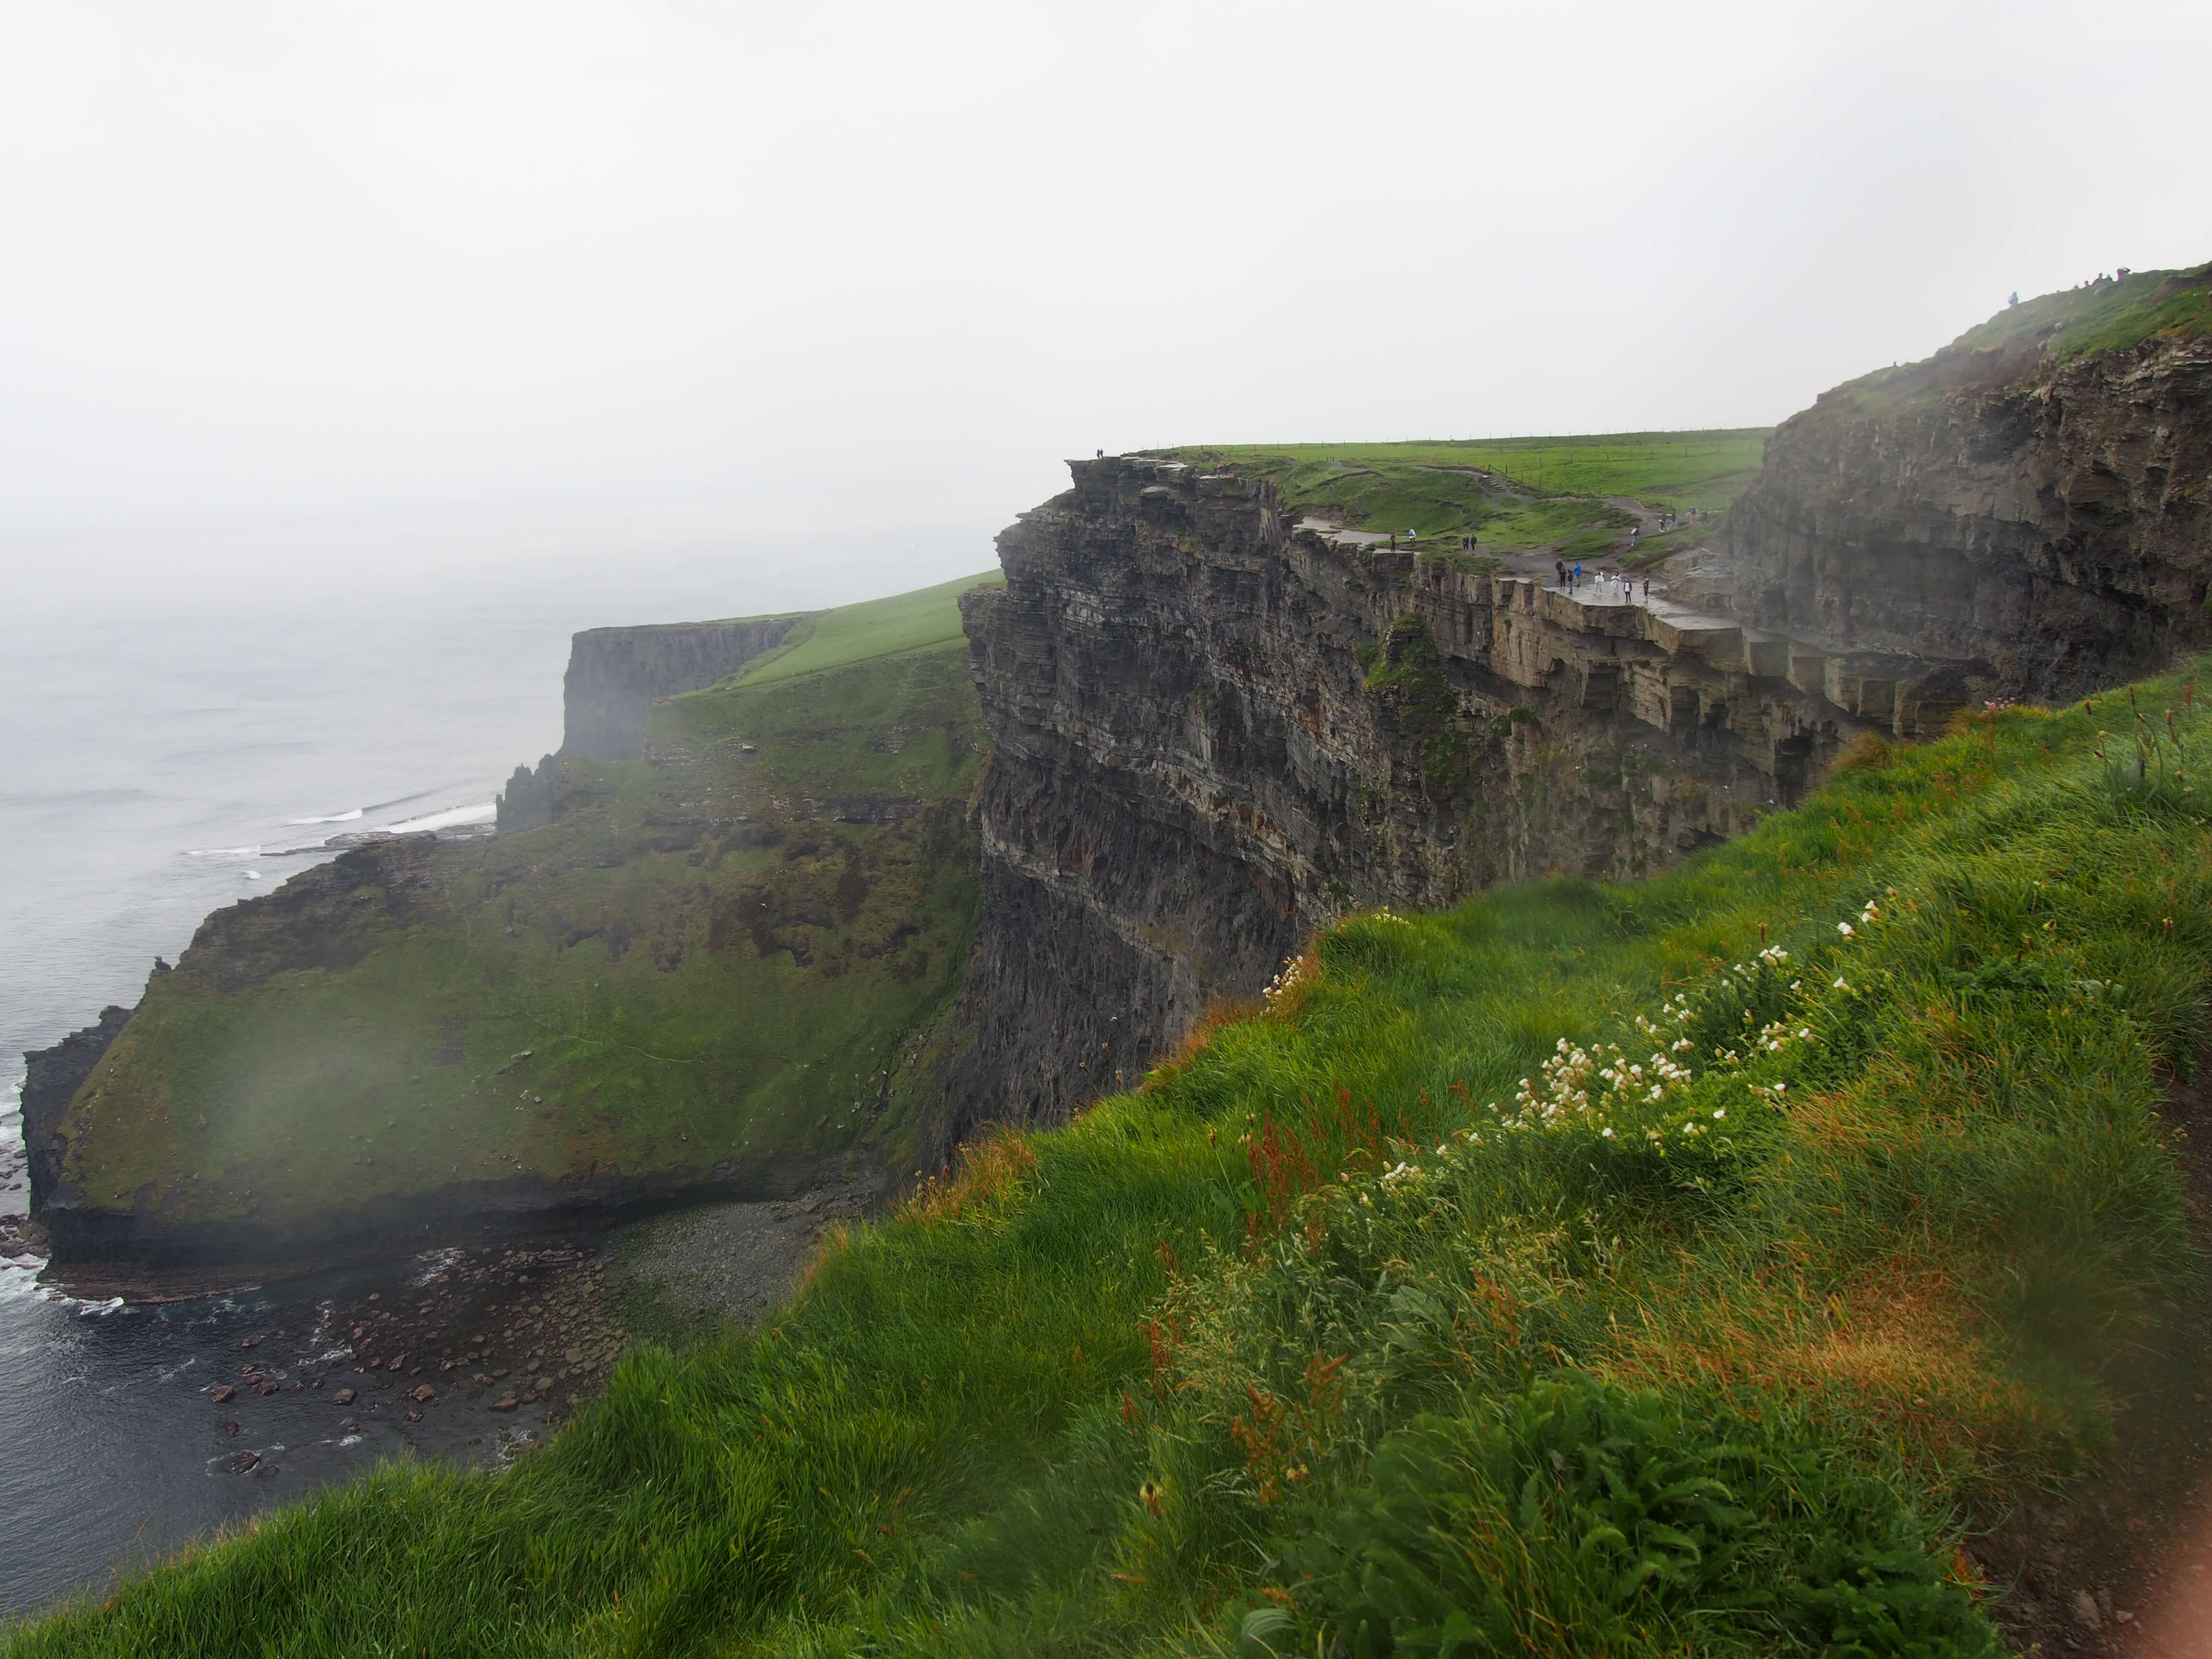 Cliffs of Moher with kids